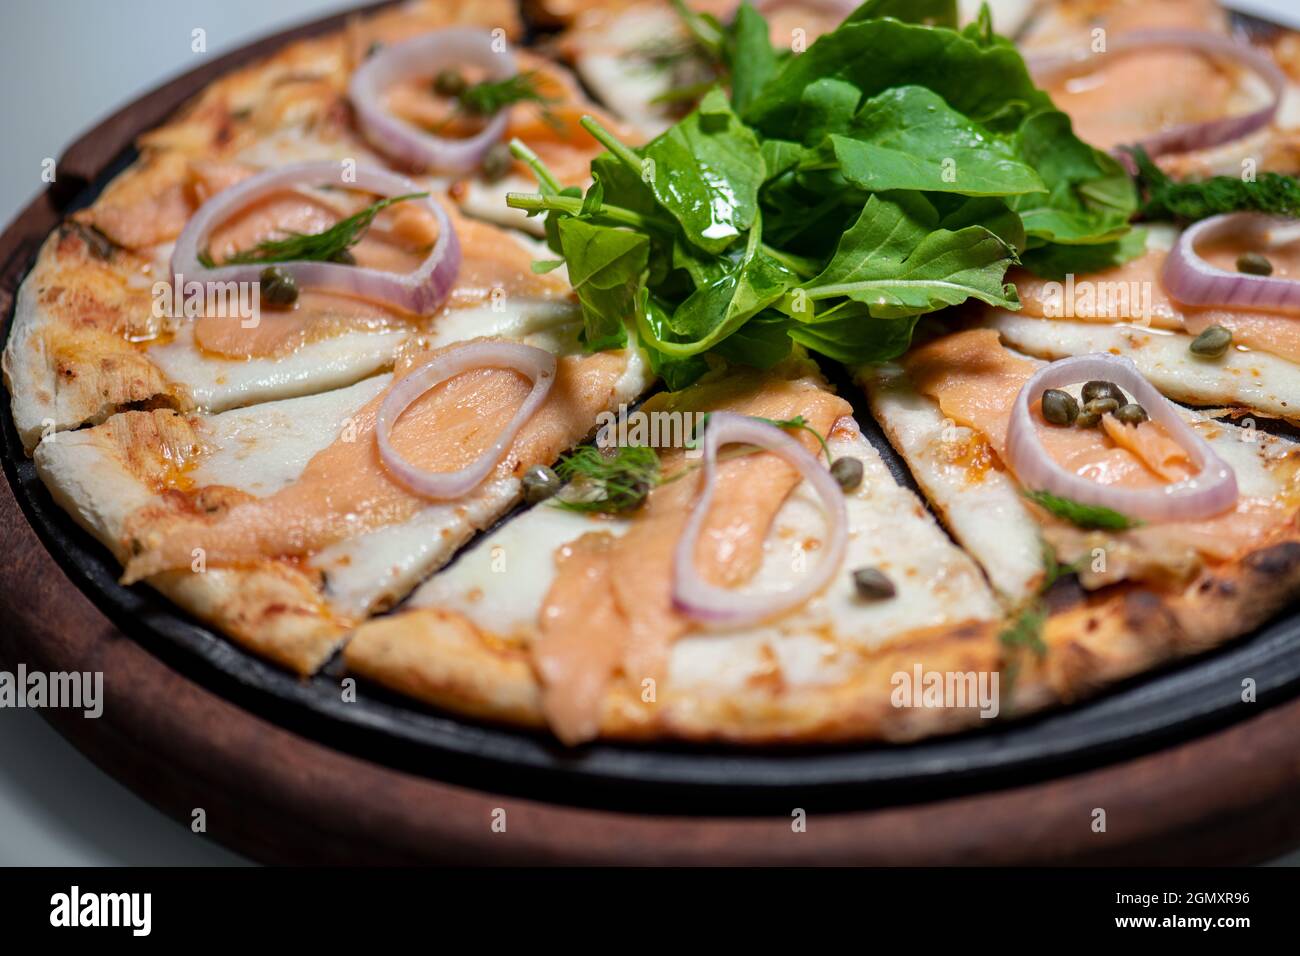 Pastry oven food cheese pizza manouche. Labnani food.Turkish version of Italian pizza with extra cheese Stock Photo